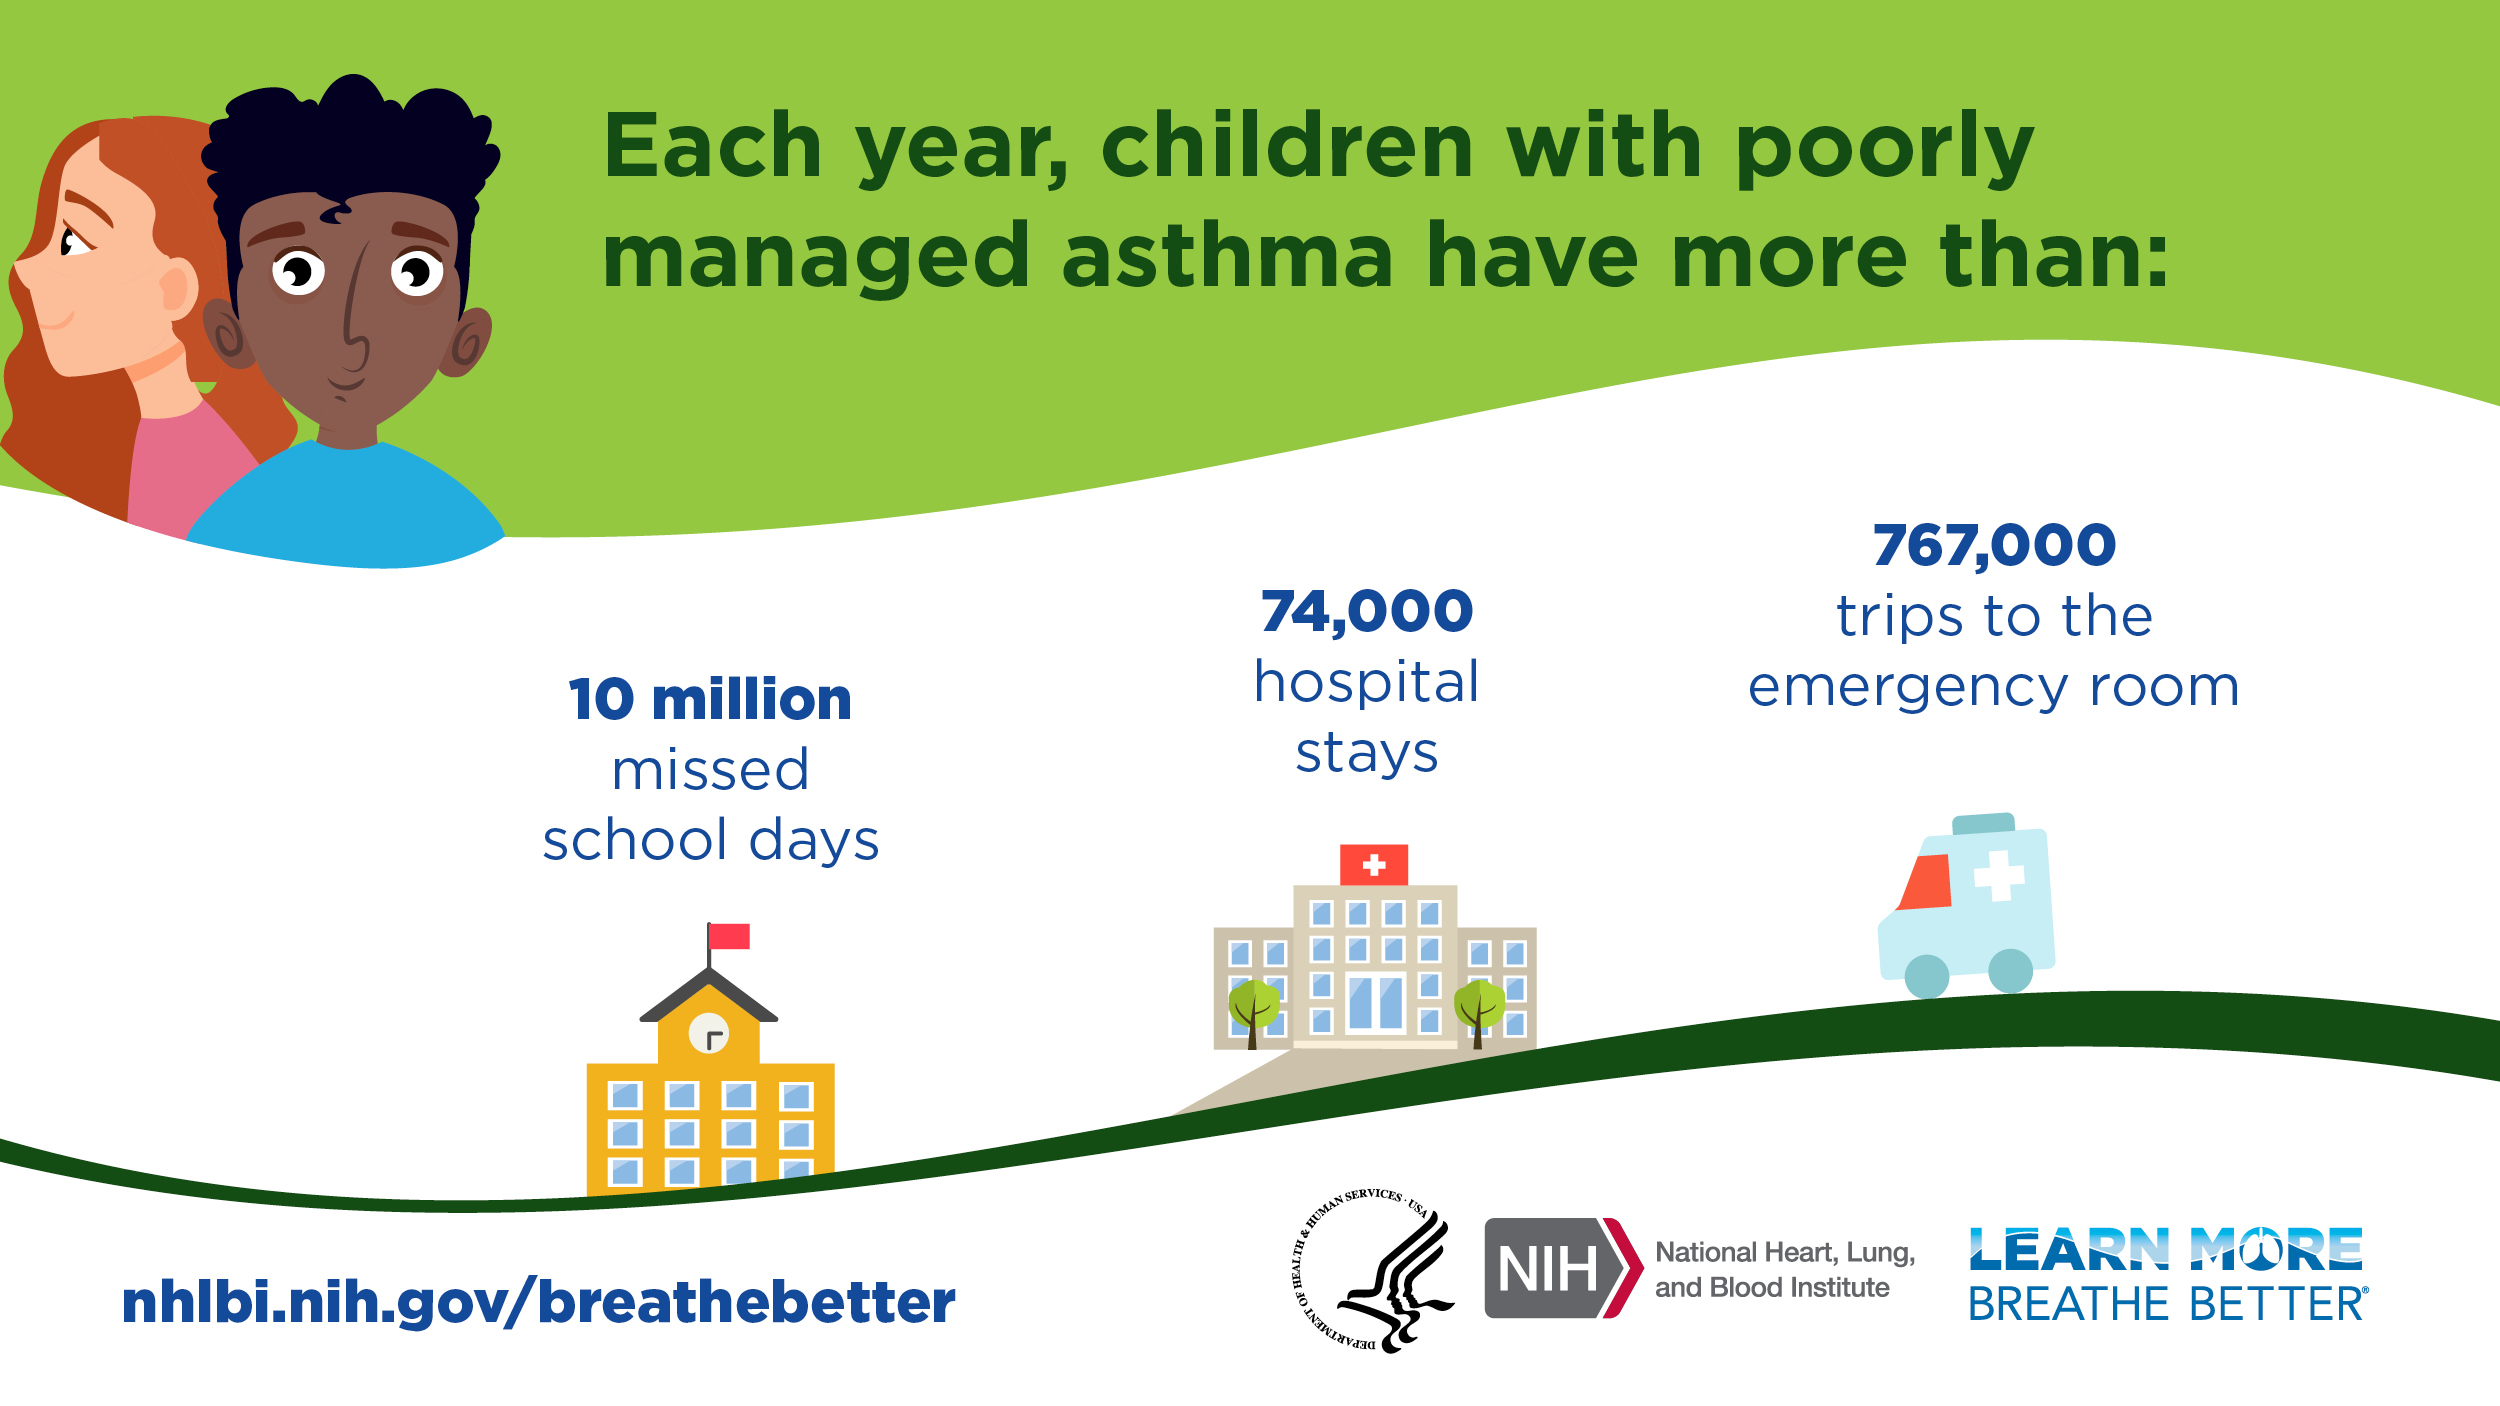 graphic about children with poorly managed asthma missing school